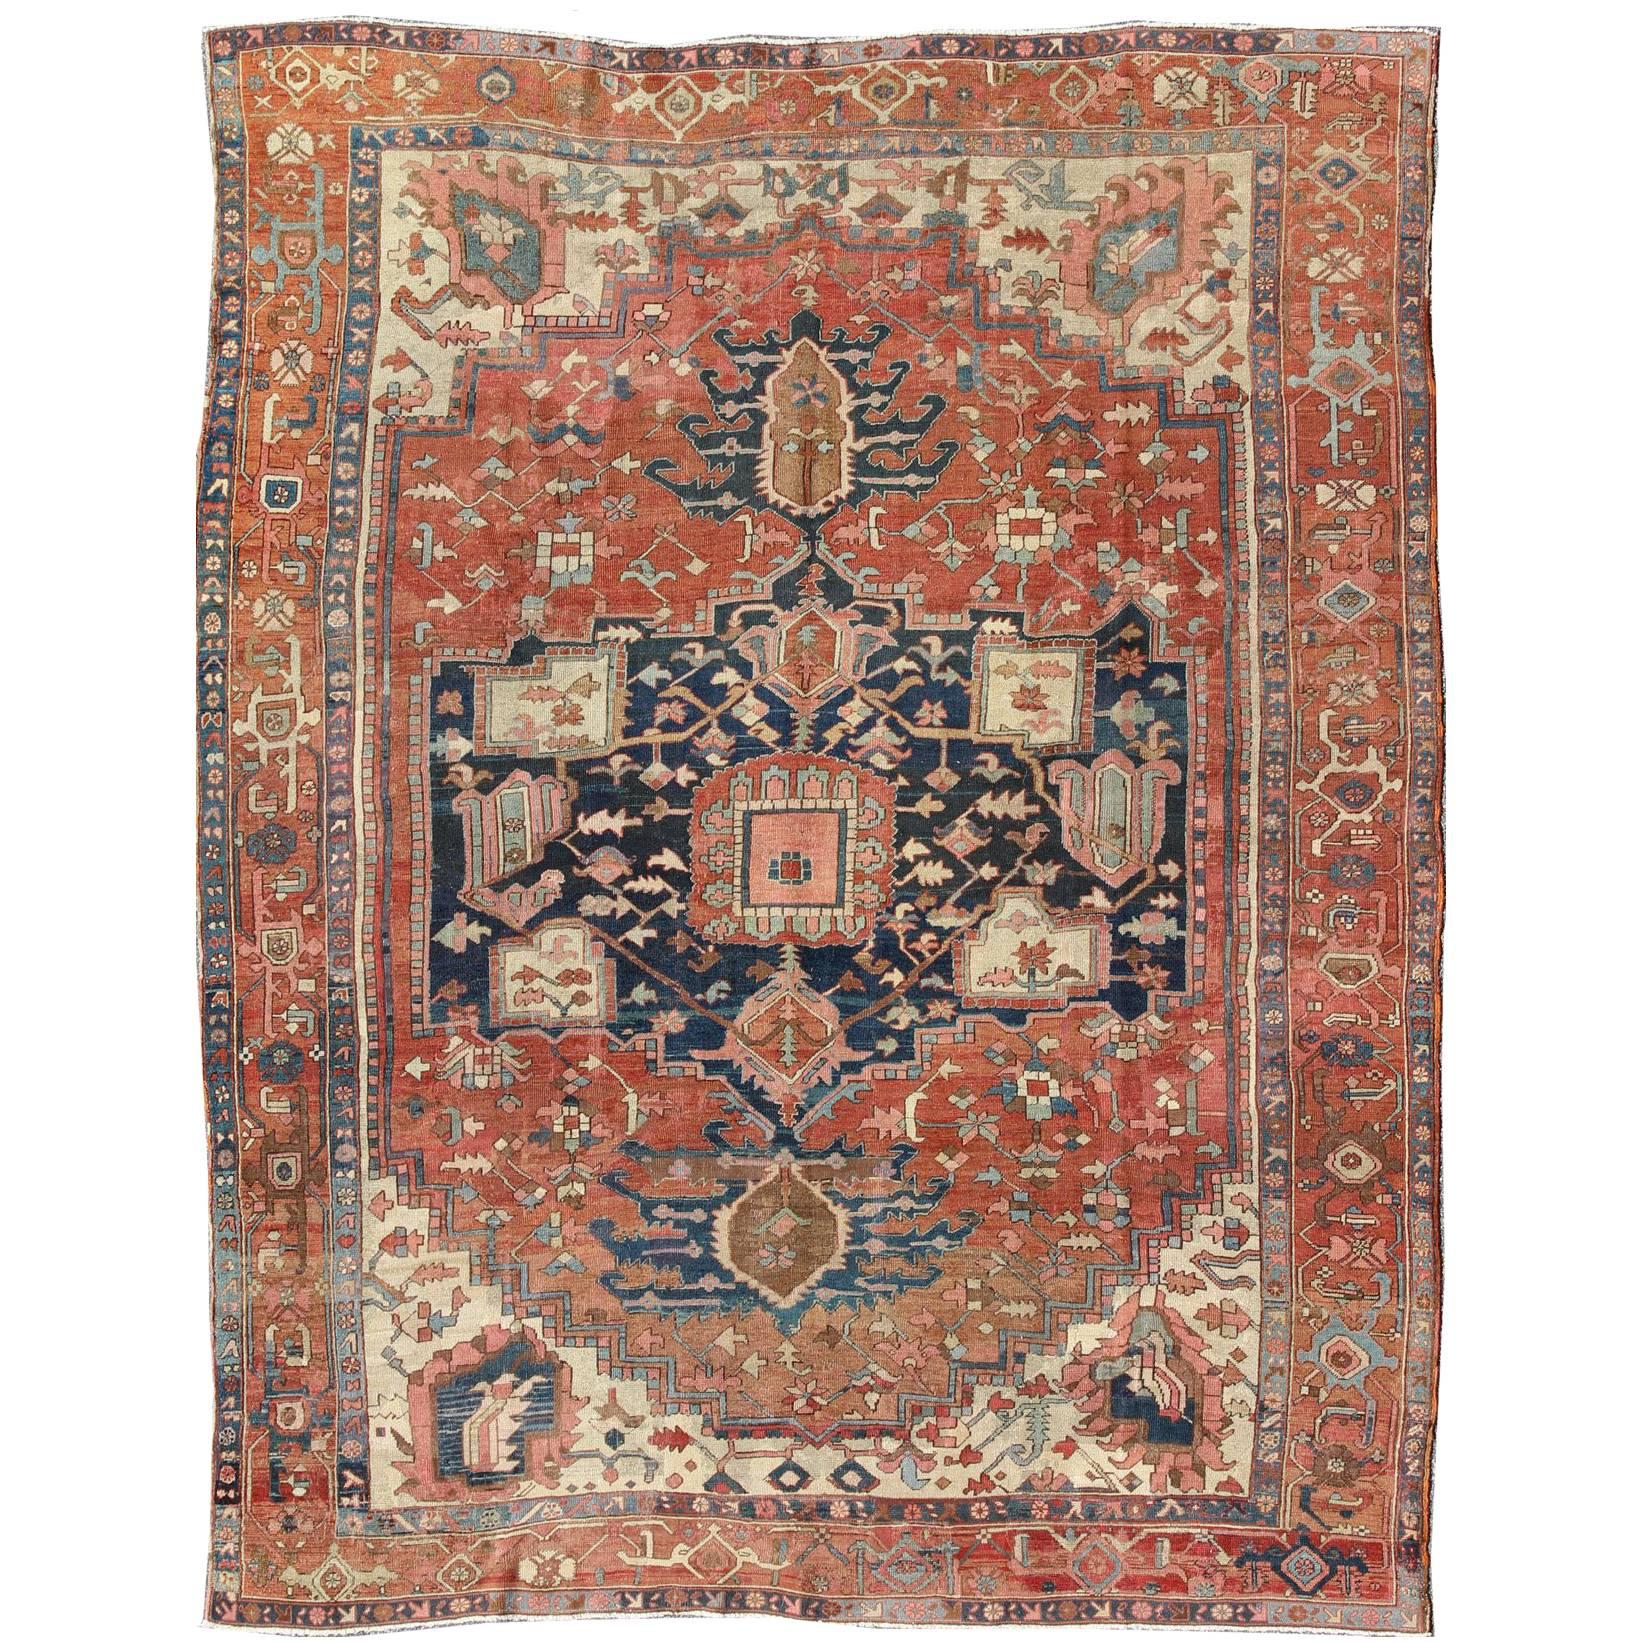 Antique Persian Serapi Rug With Medallion in Rusty-Orange, Blue and Cream's 